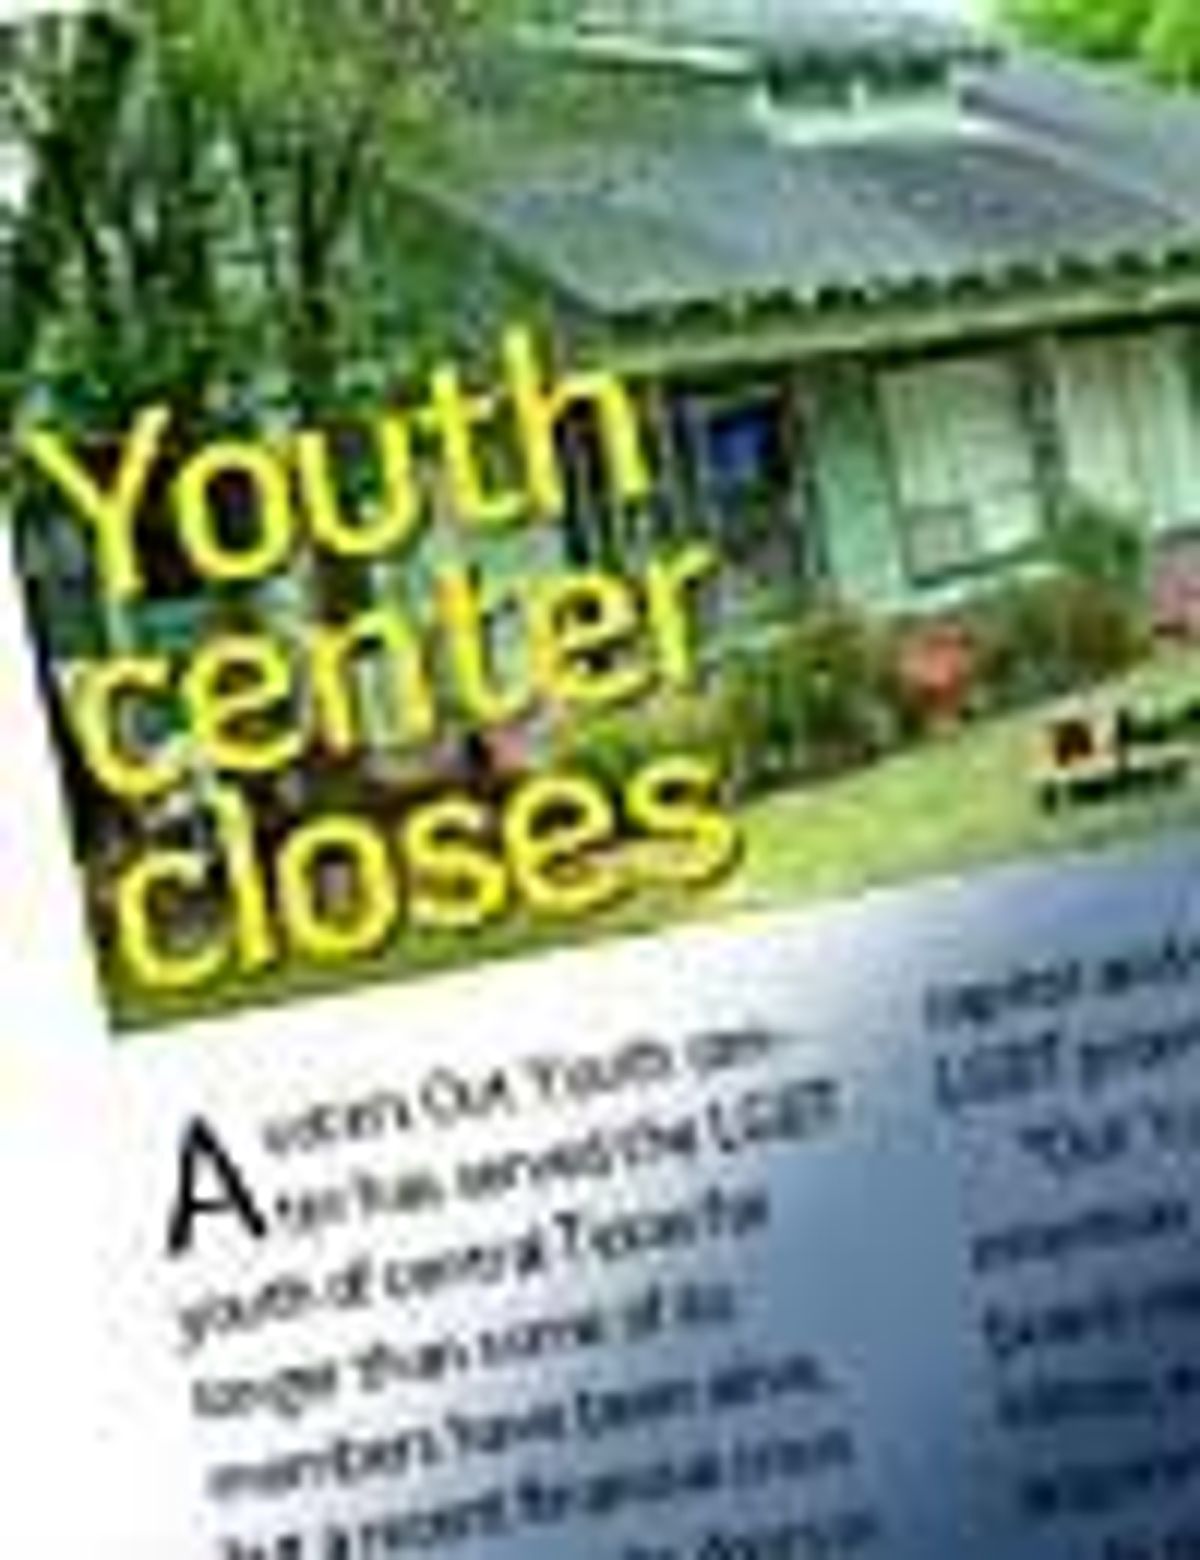 962_youthcenter